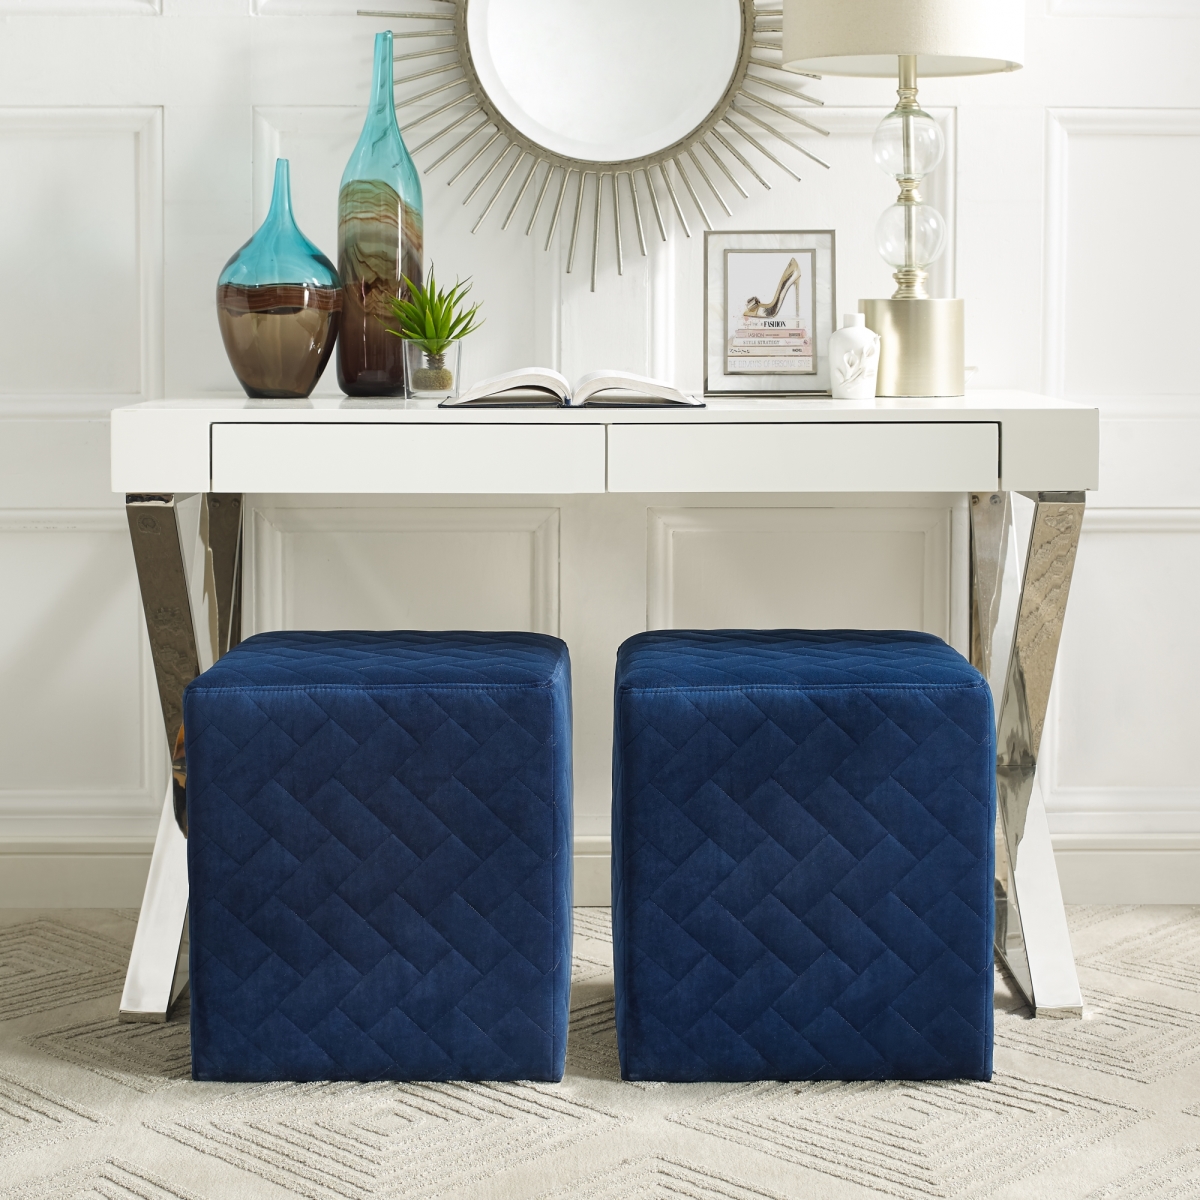 Micah Velvet Brick Quilted Cube Ottoman - Navy